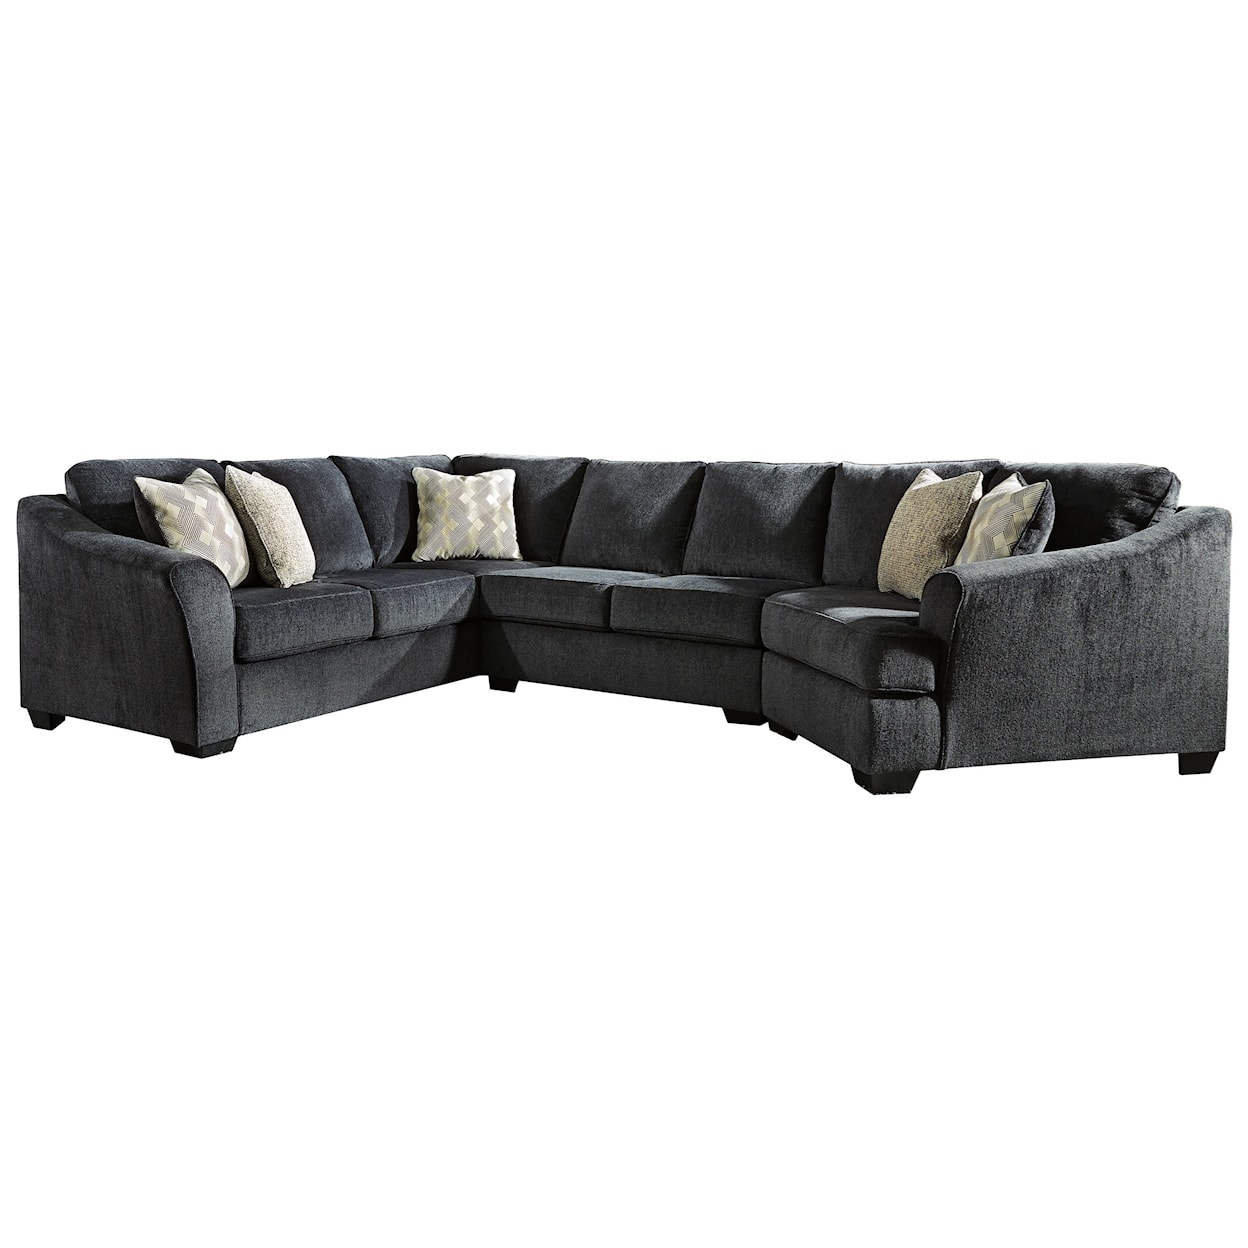 Signature Design by Ashley Eltmann 3-Piece Sectional with Right Cuddler